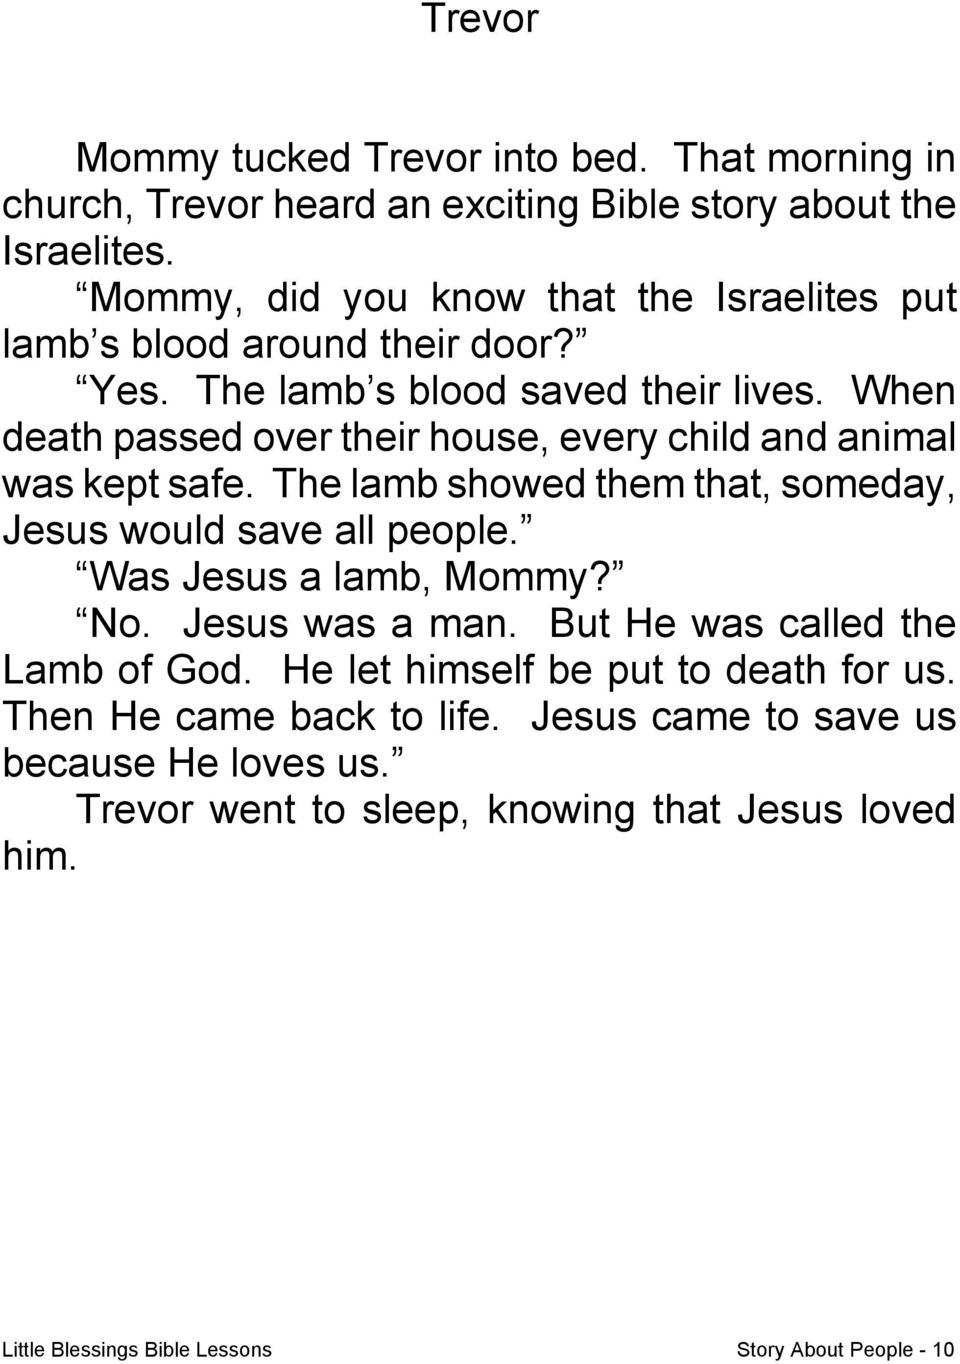 When death passed over their house, every child and animal was kept safe. The lamb showed them that, someday, Jesus would save all people. Was Jesus a lamb, Mommy? No.